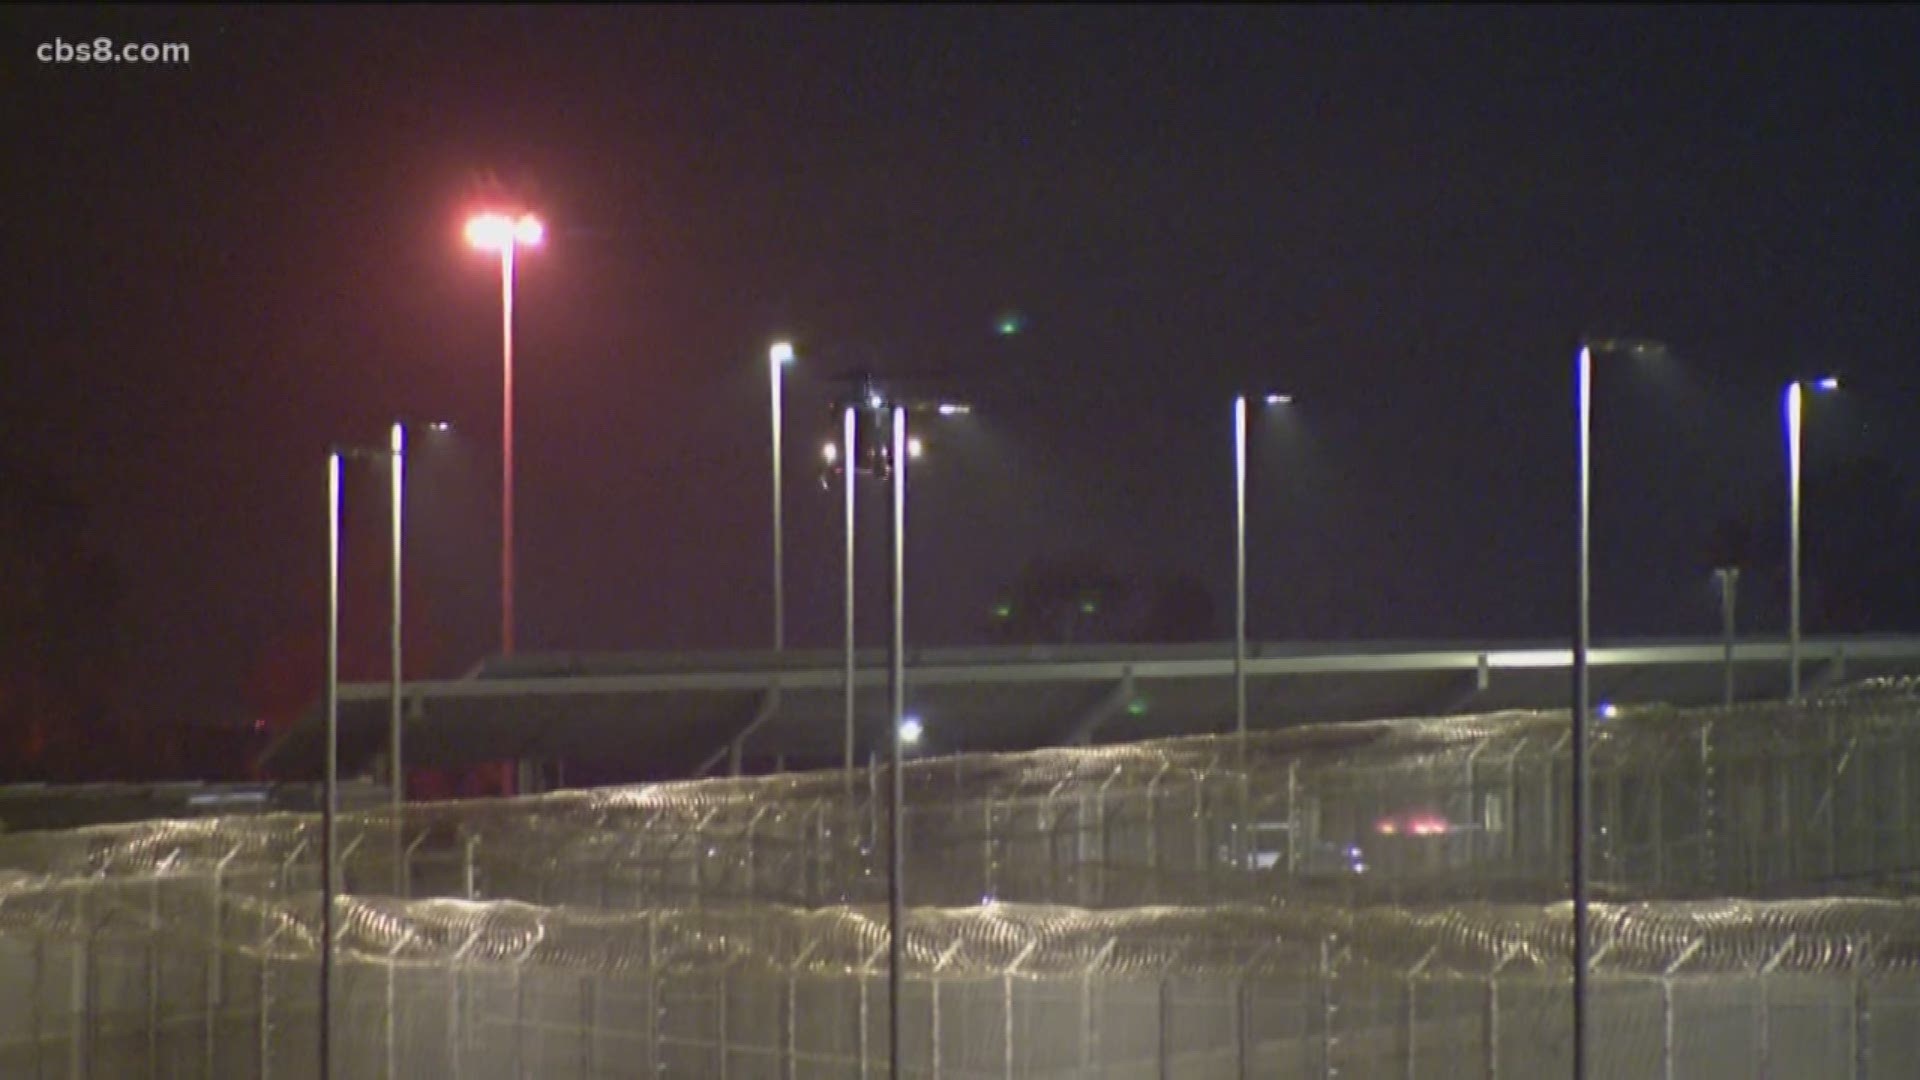 Cal Fire San Diego reported 100 inmates were in the prison yard when a fight broke out some time before 9 p.m.